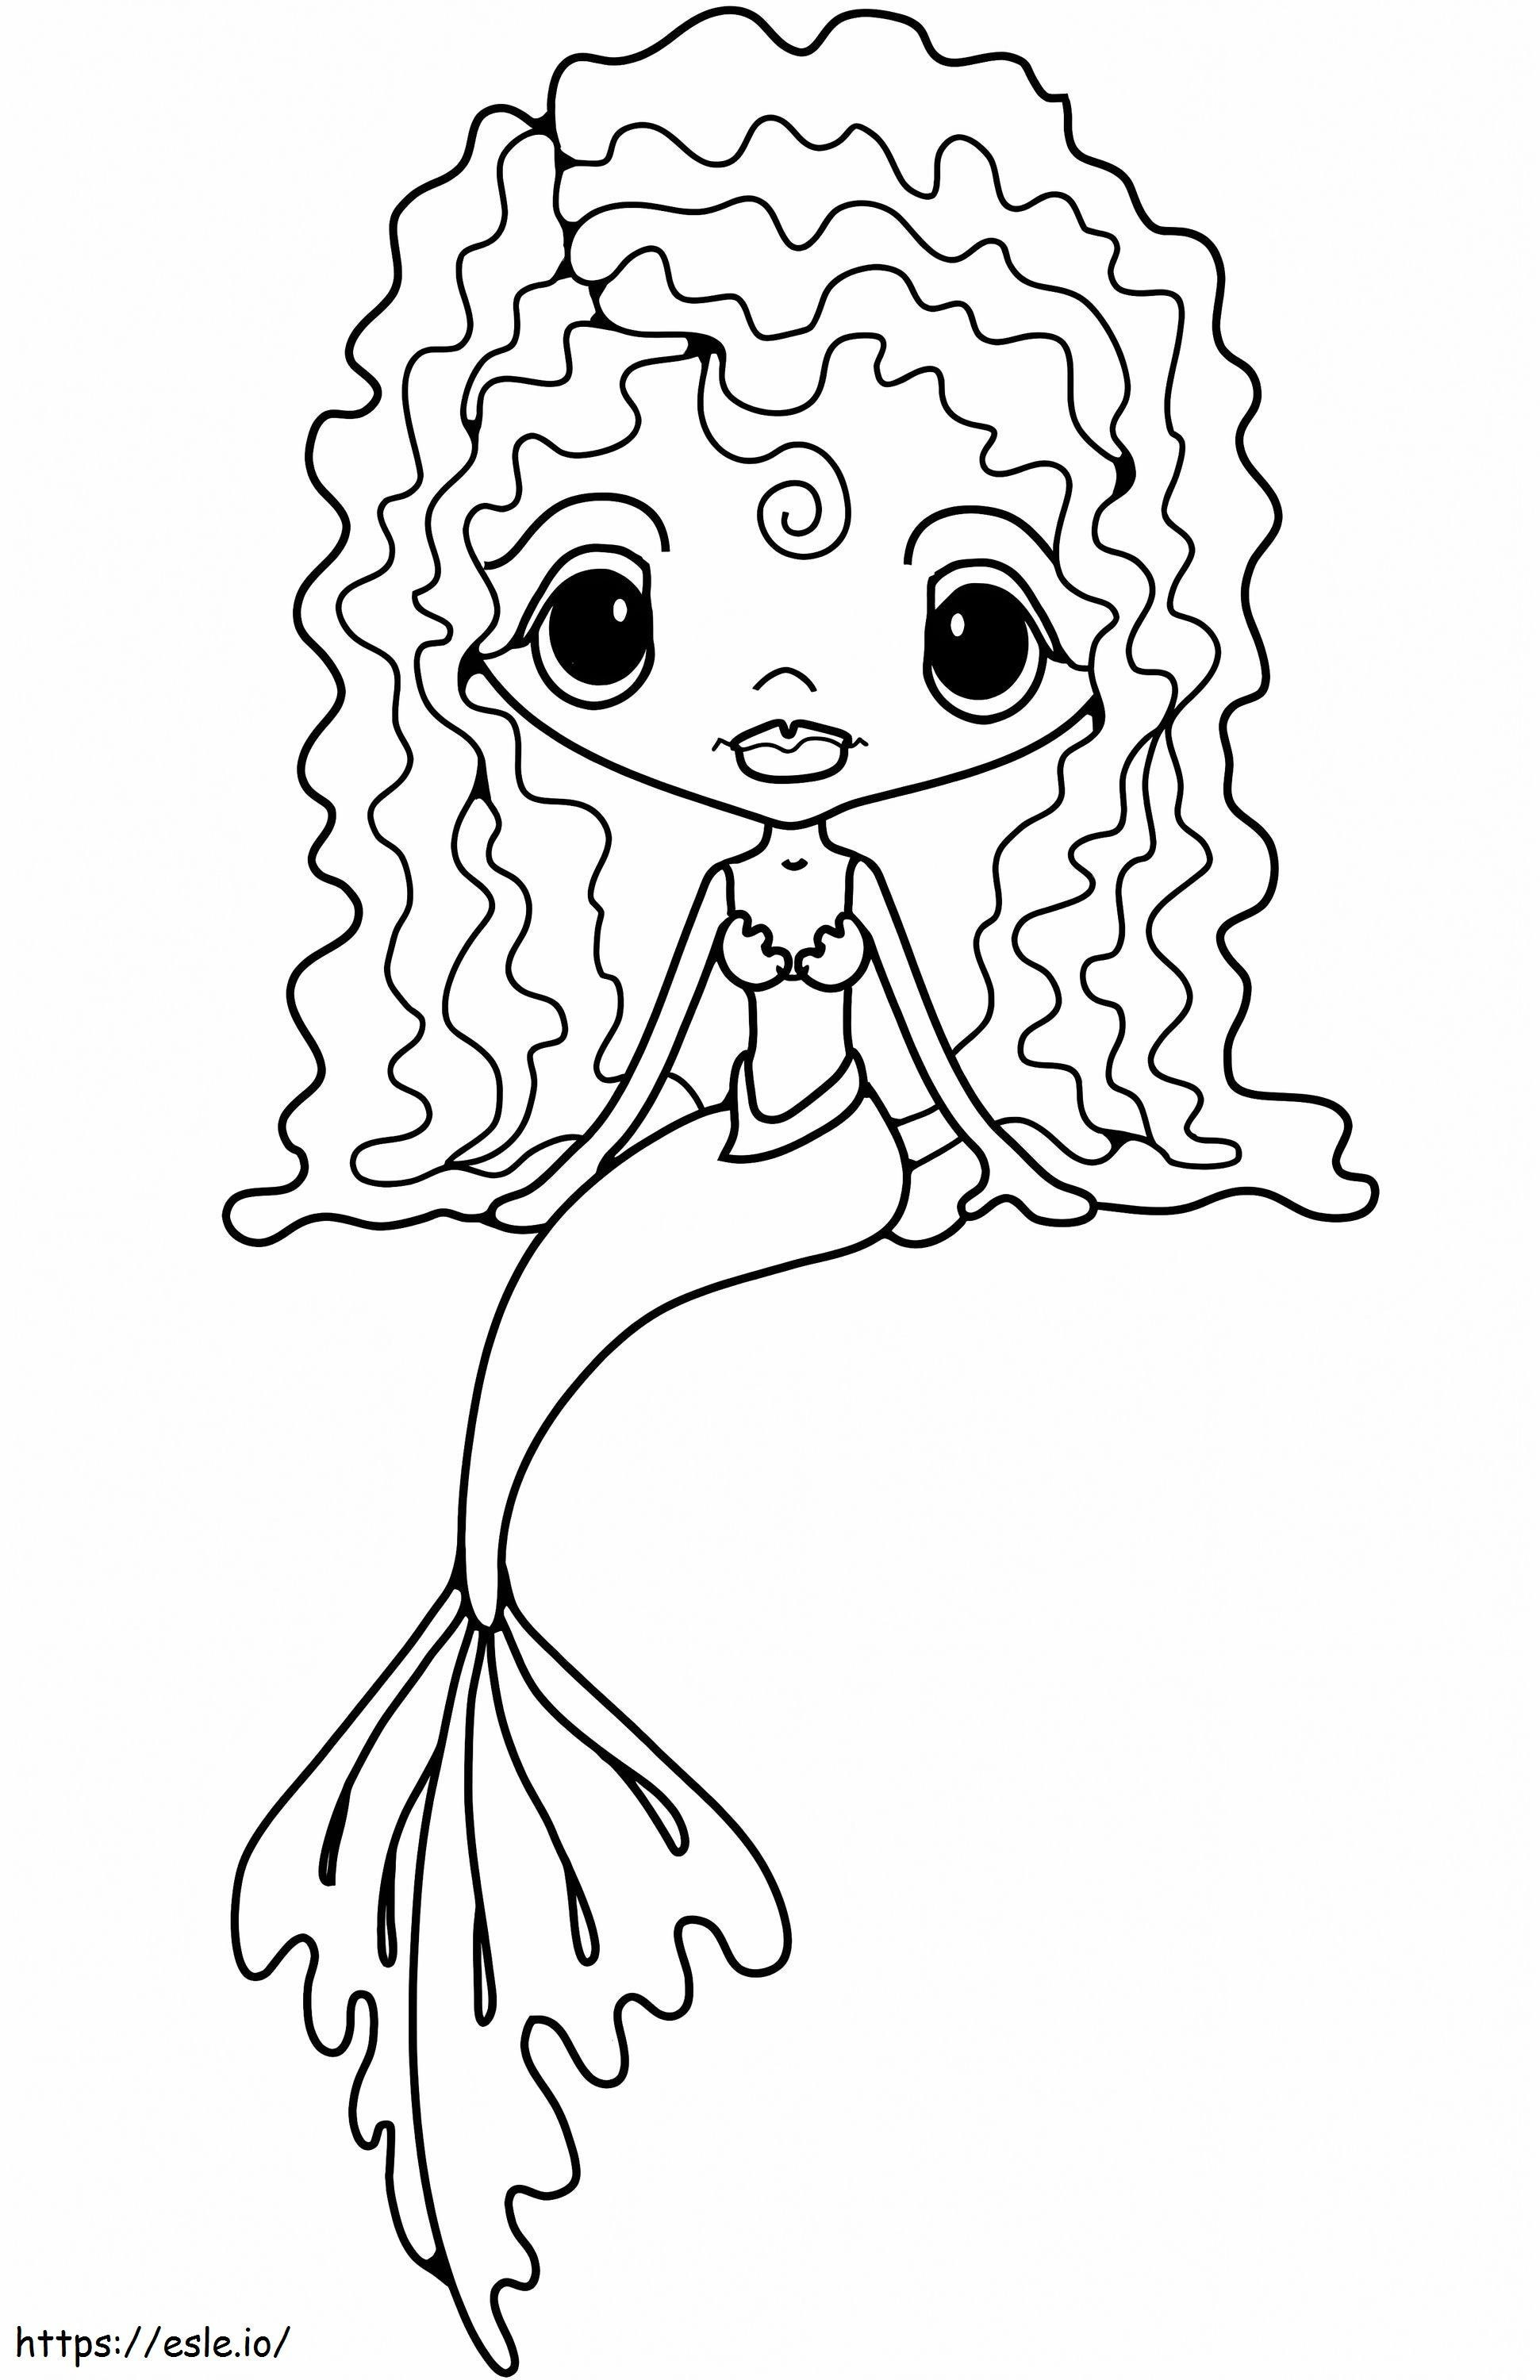 Lovey Mermaid coloring page